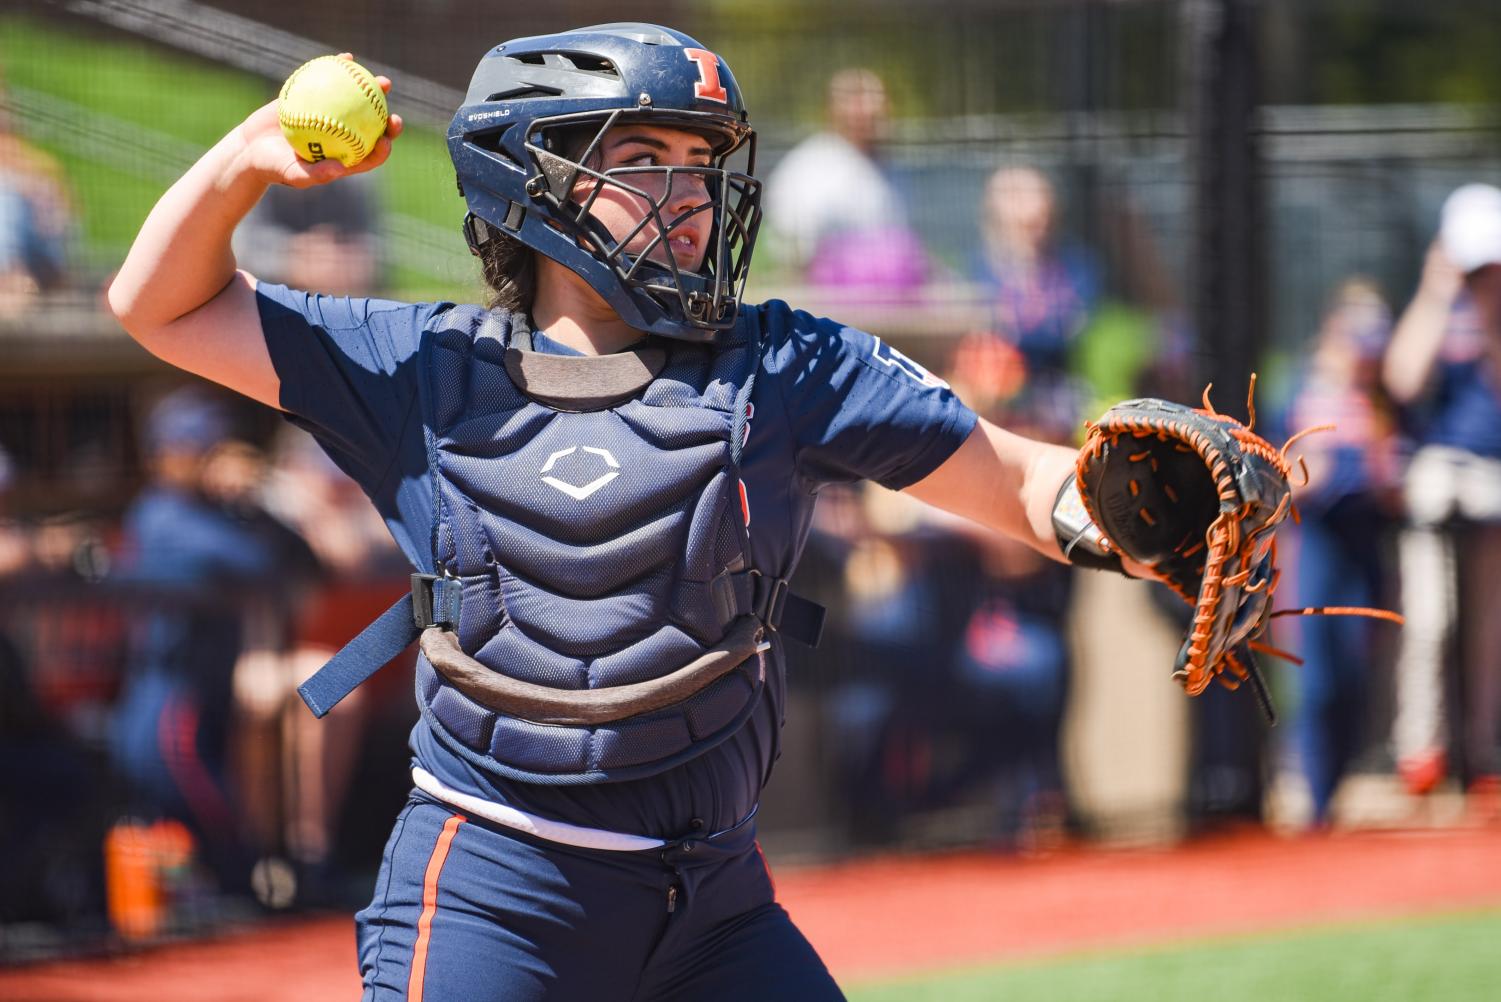 One and done: Illinois softball crash out of Big Ten Championships in quarterfinals – The Daily Illini